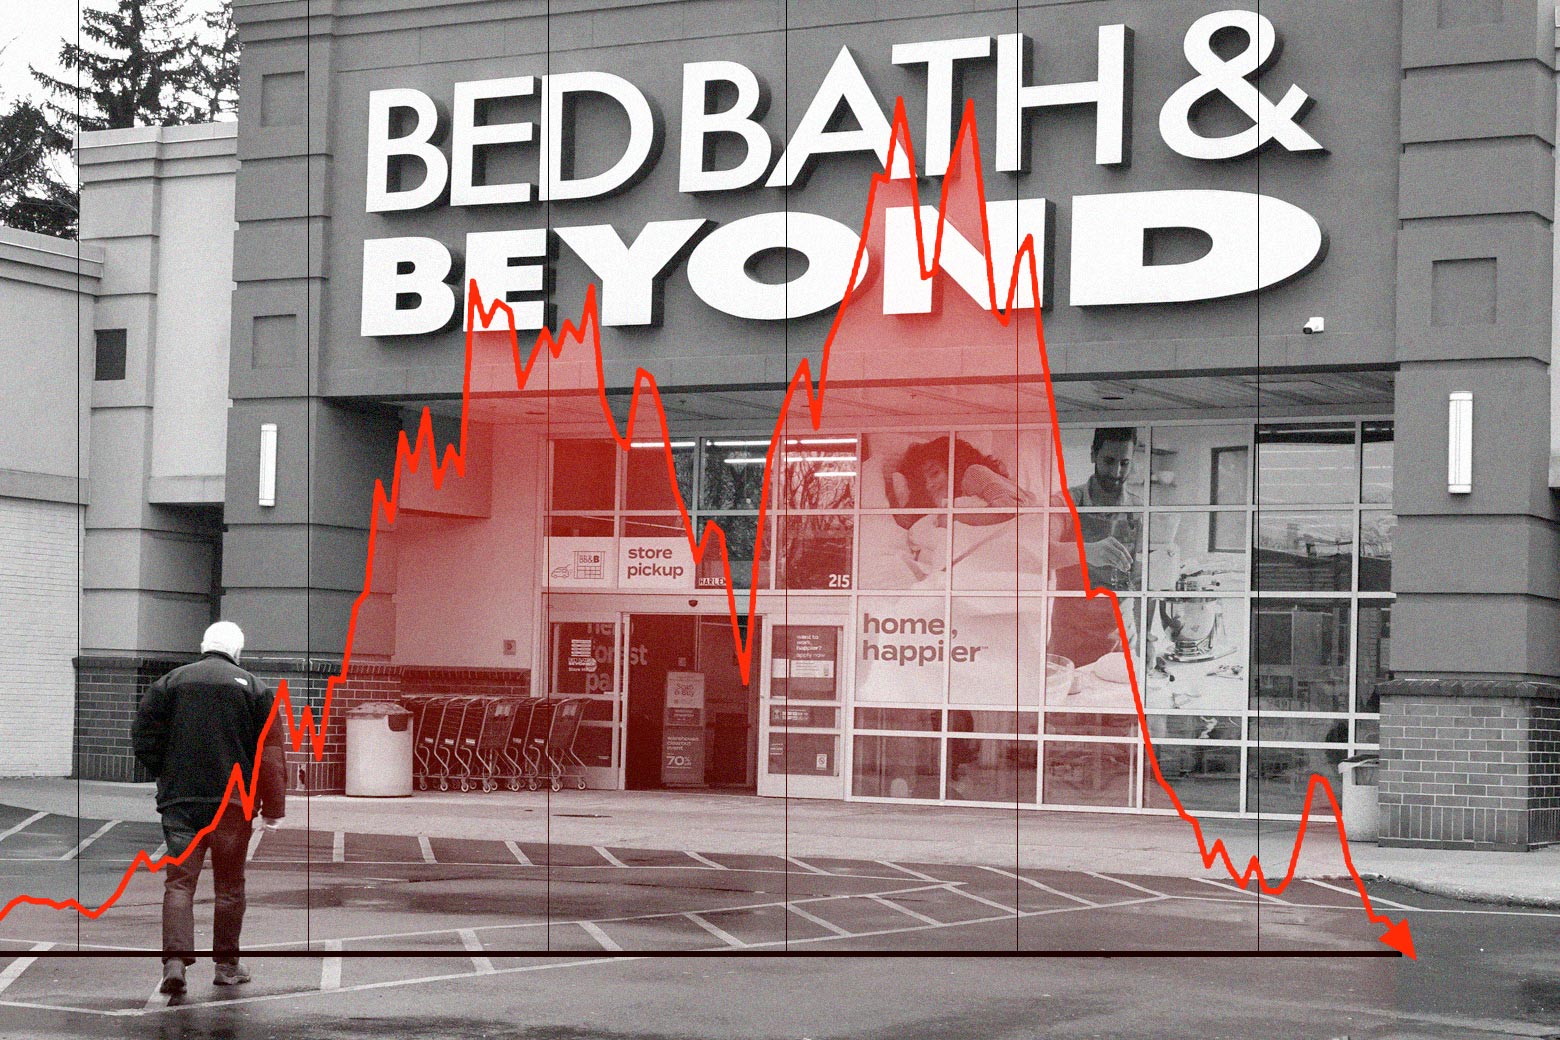 A Bed Bath and Beyond location. Superimposed over it is a red chart. Looks dramatic.